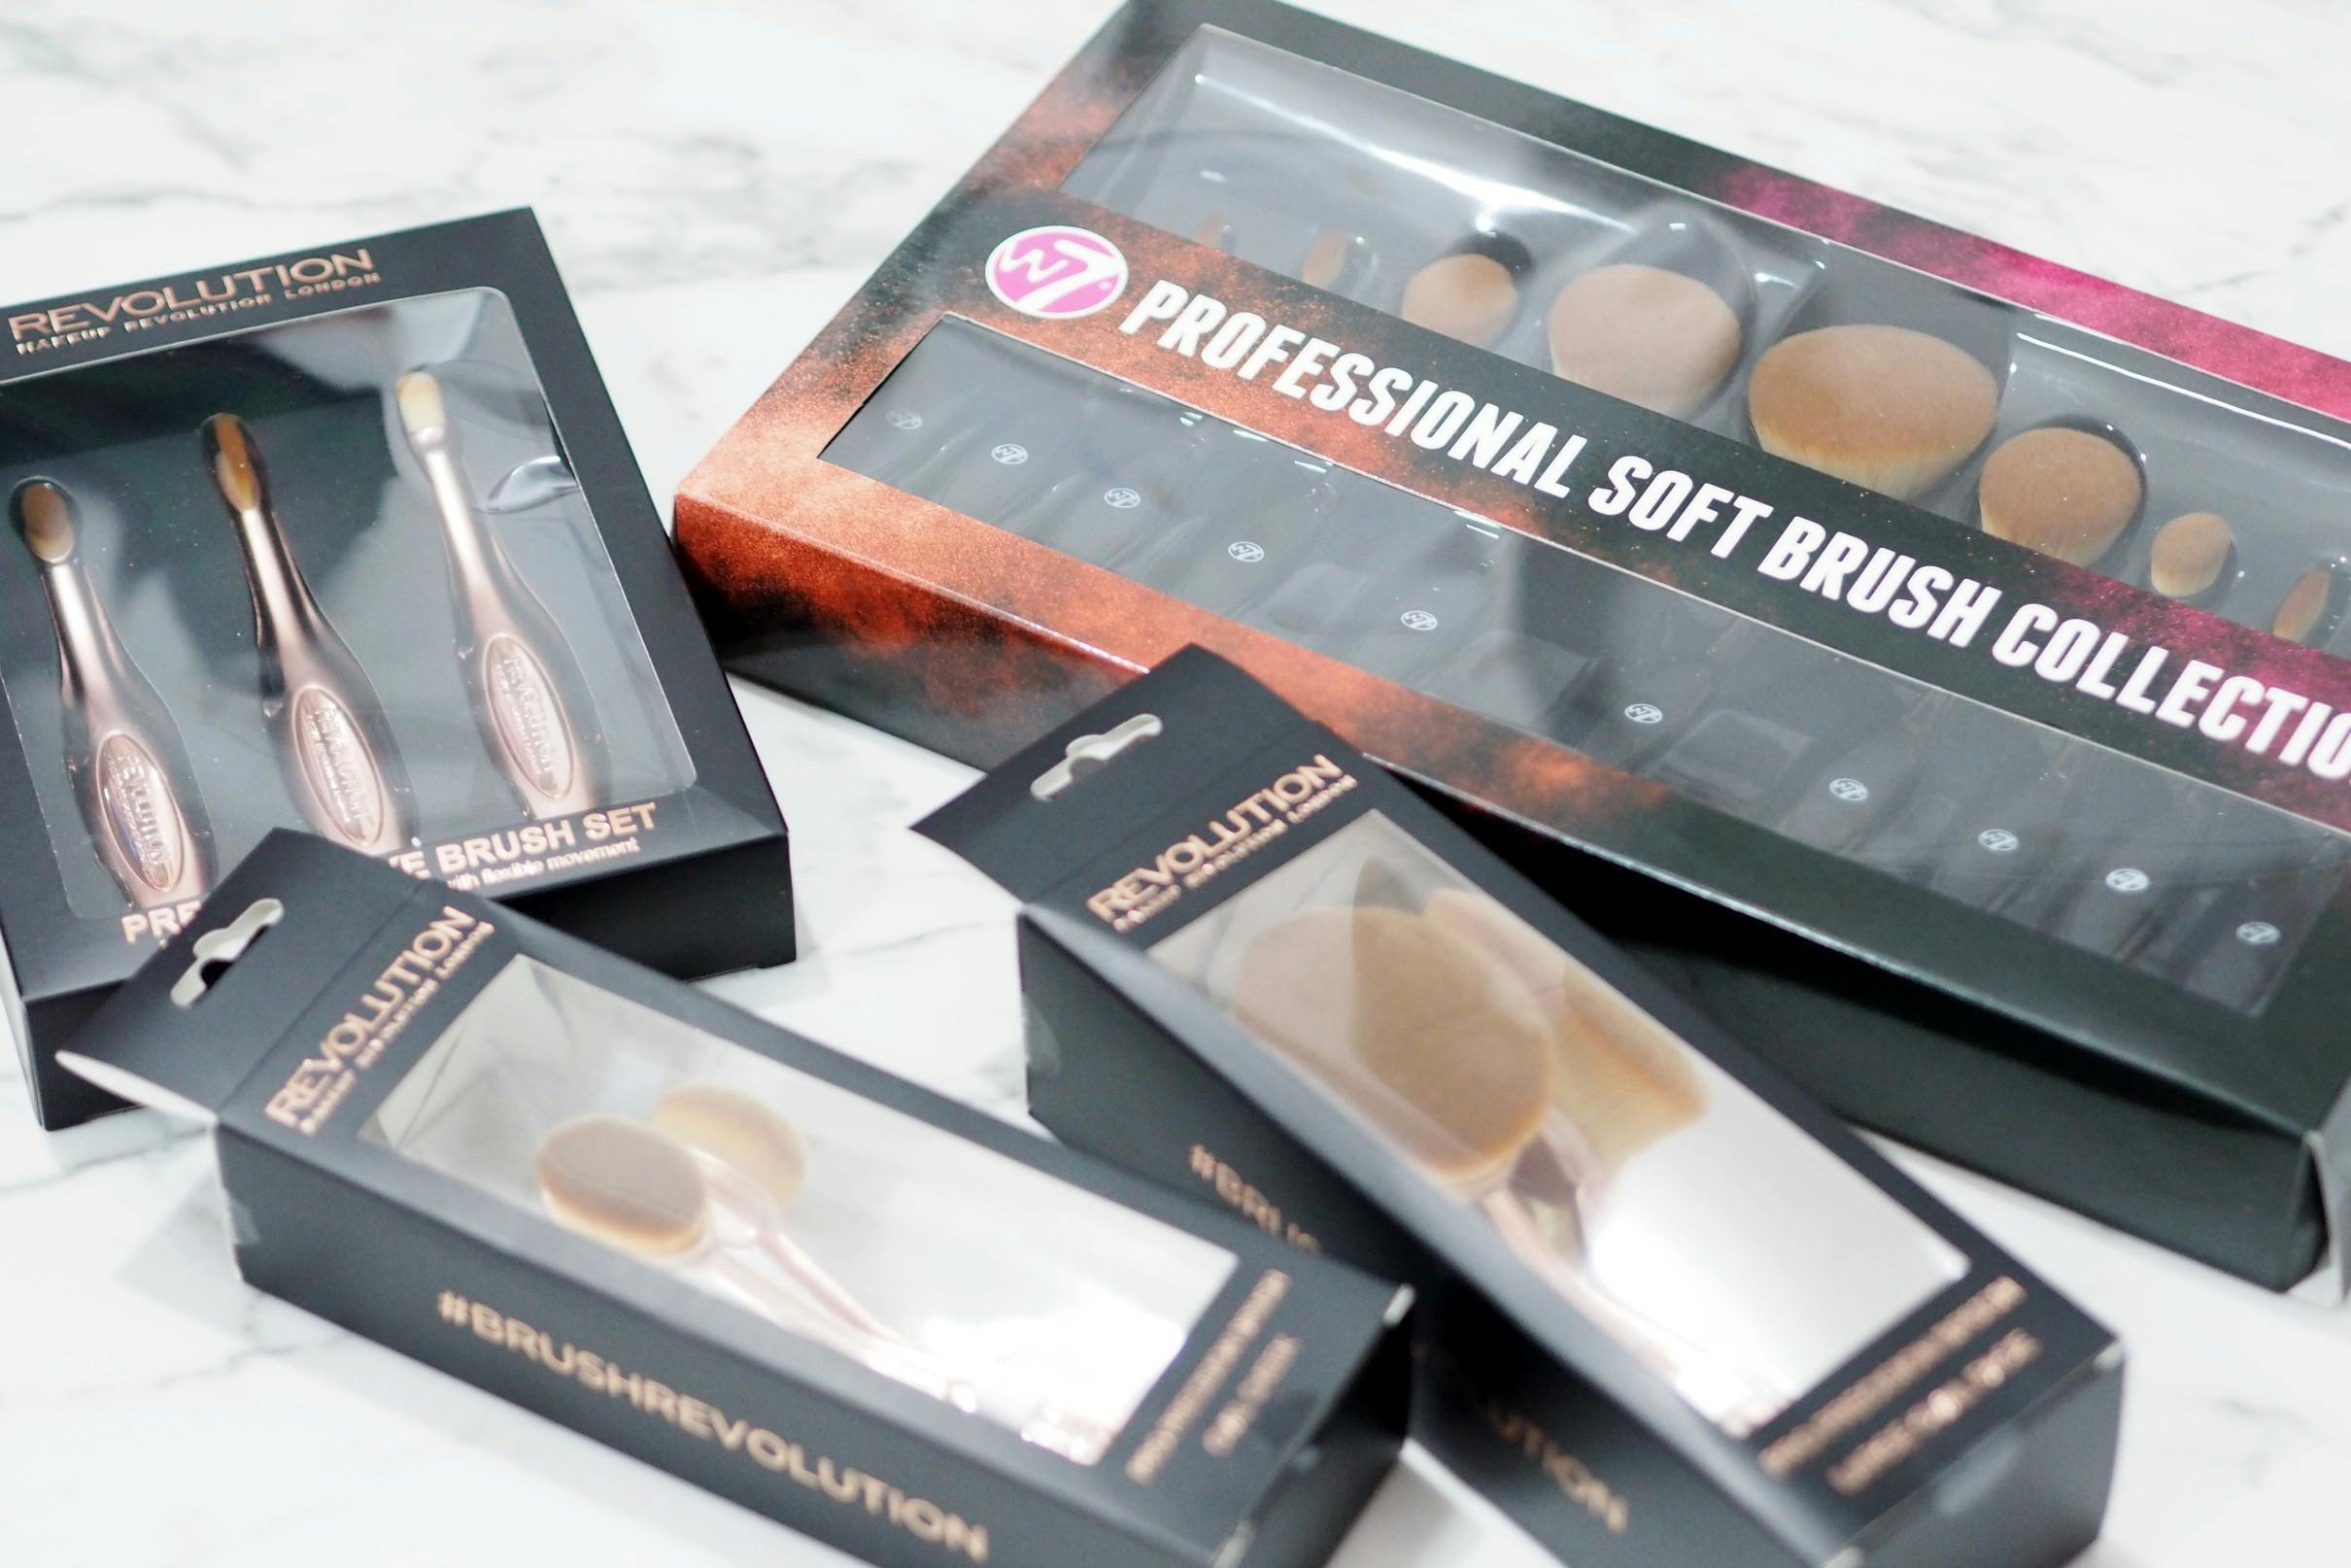 w7 professional soft oval brush collection, oval brushes, makeup revolution